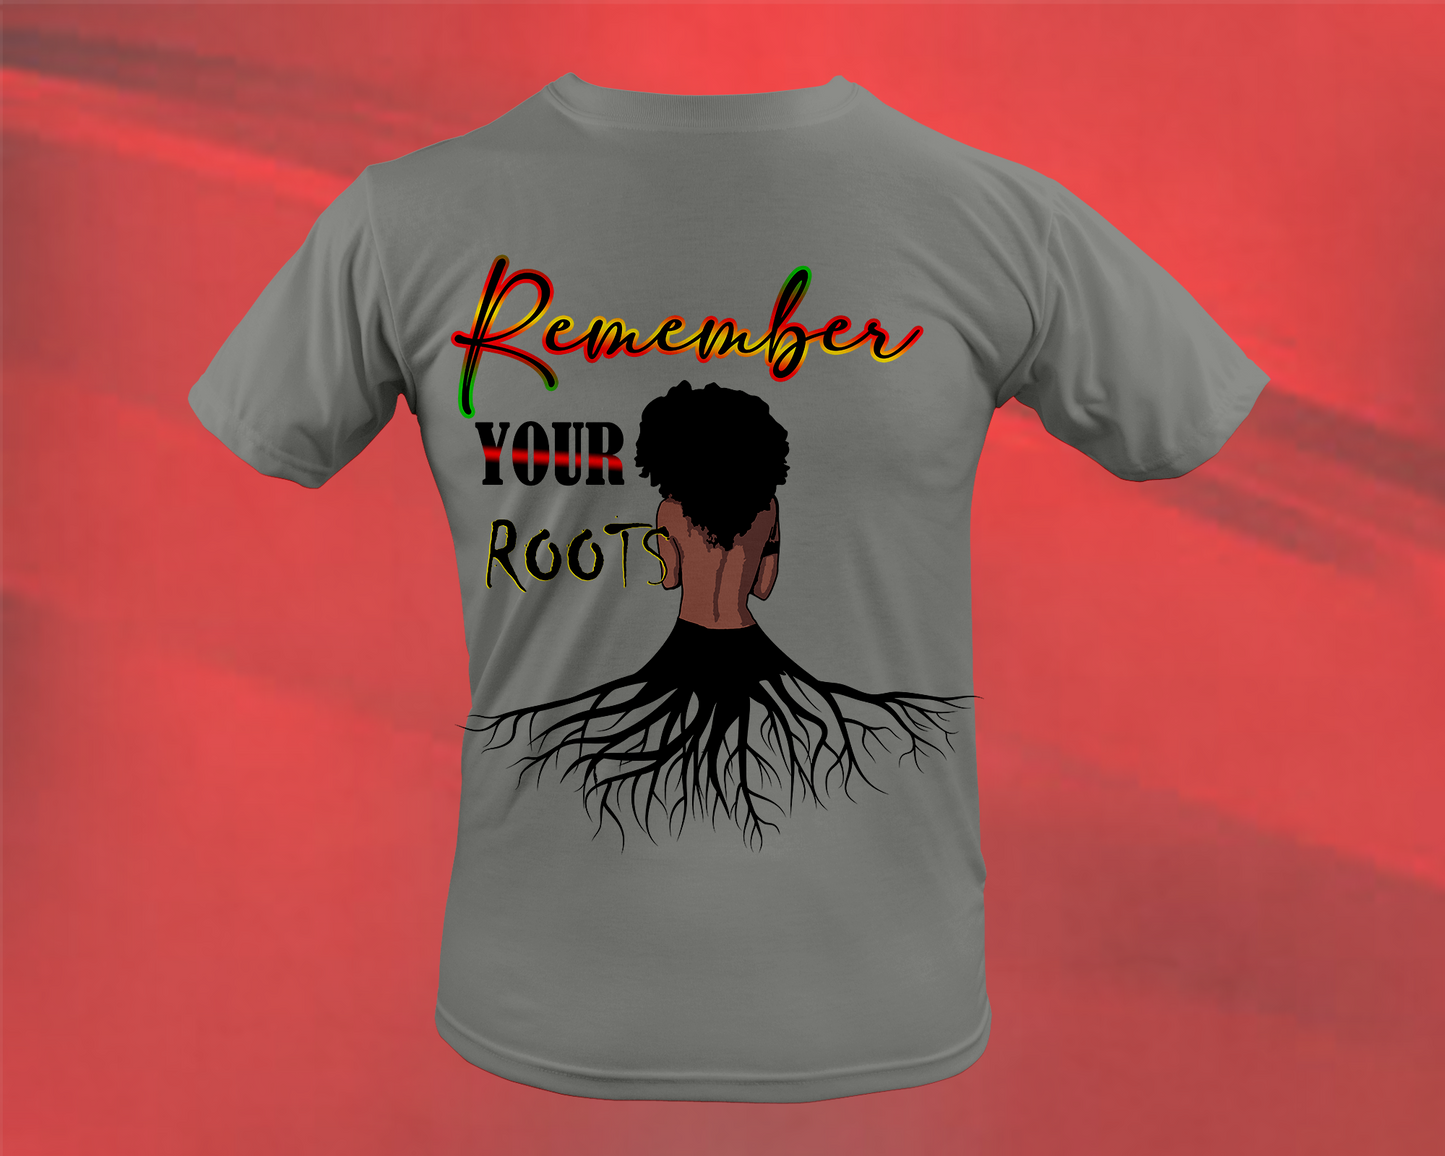 "REMEMBER YOUR ROOTS"